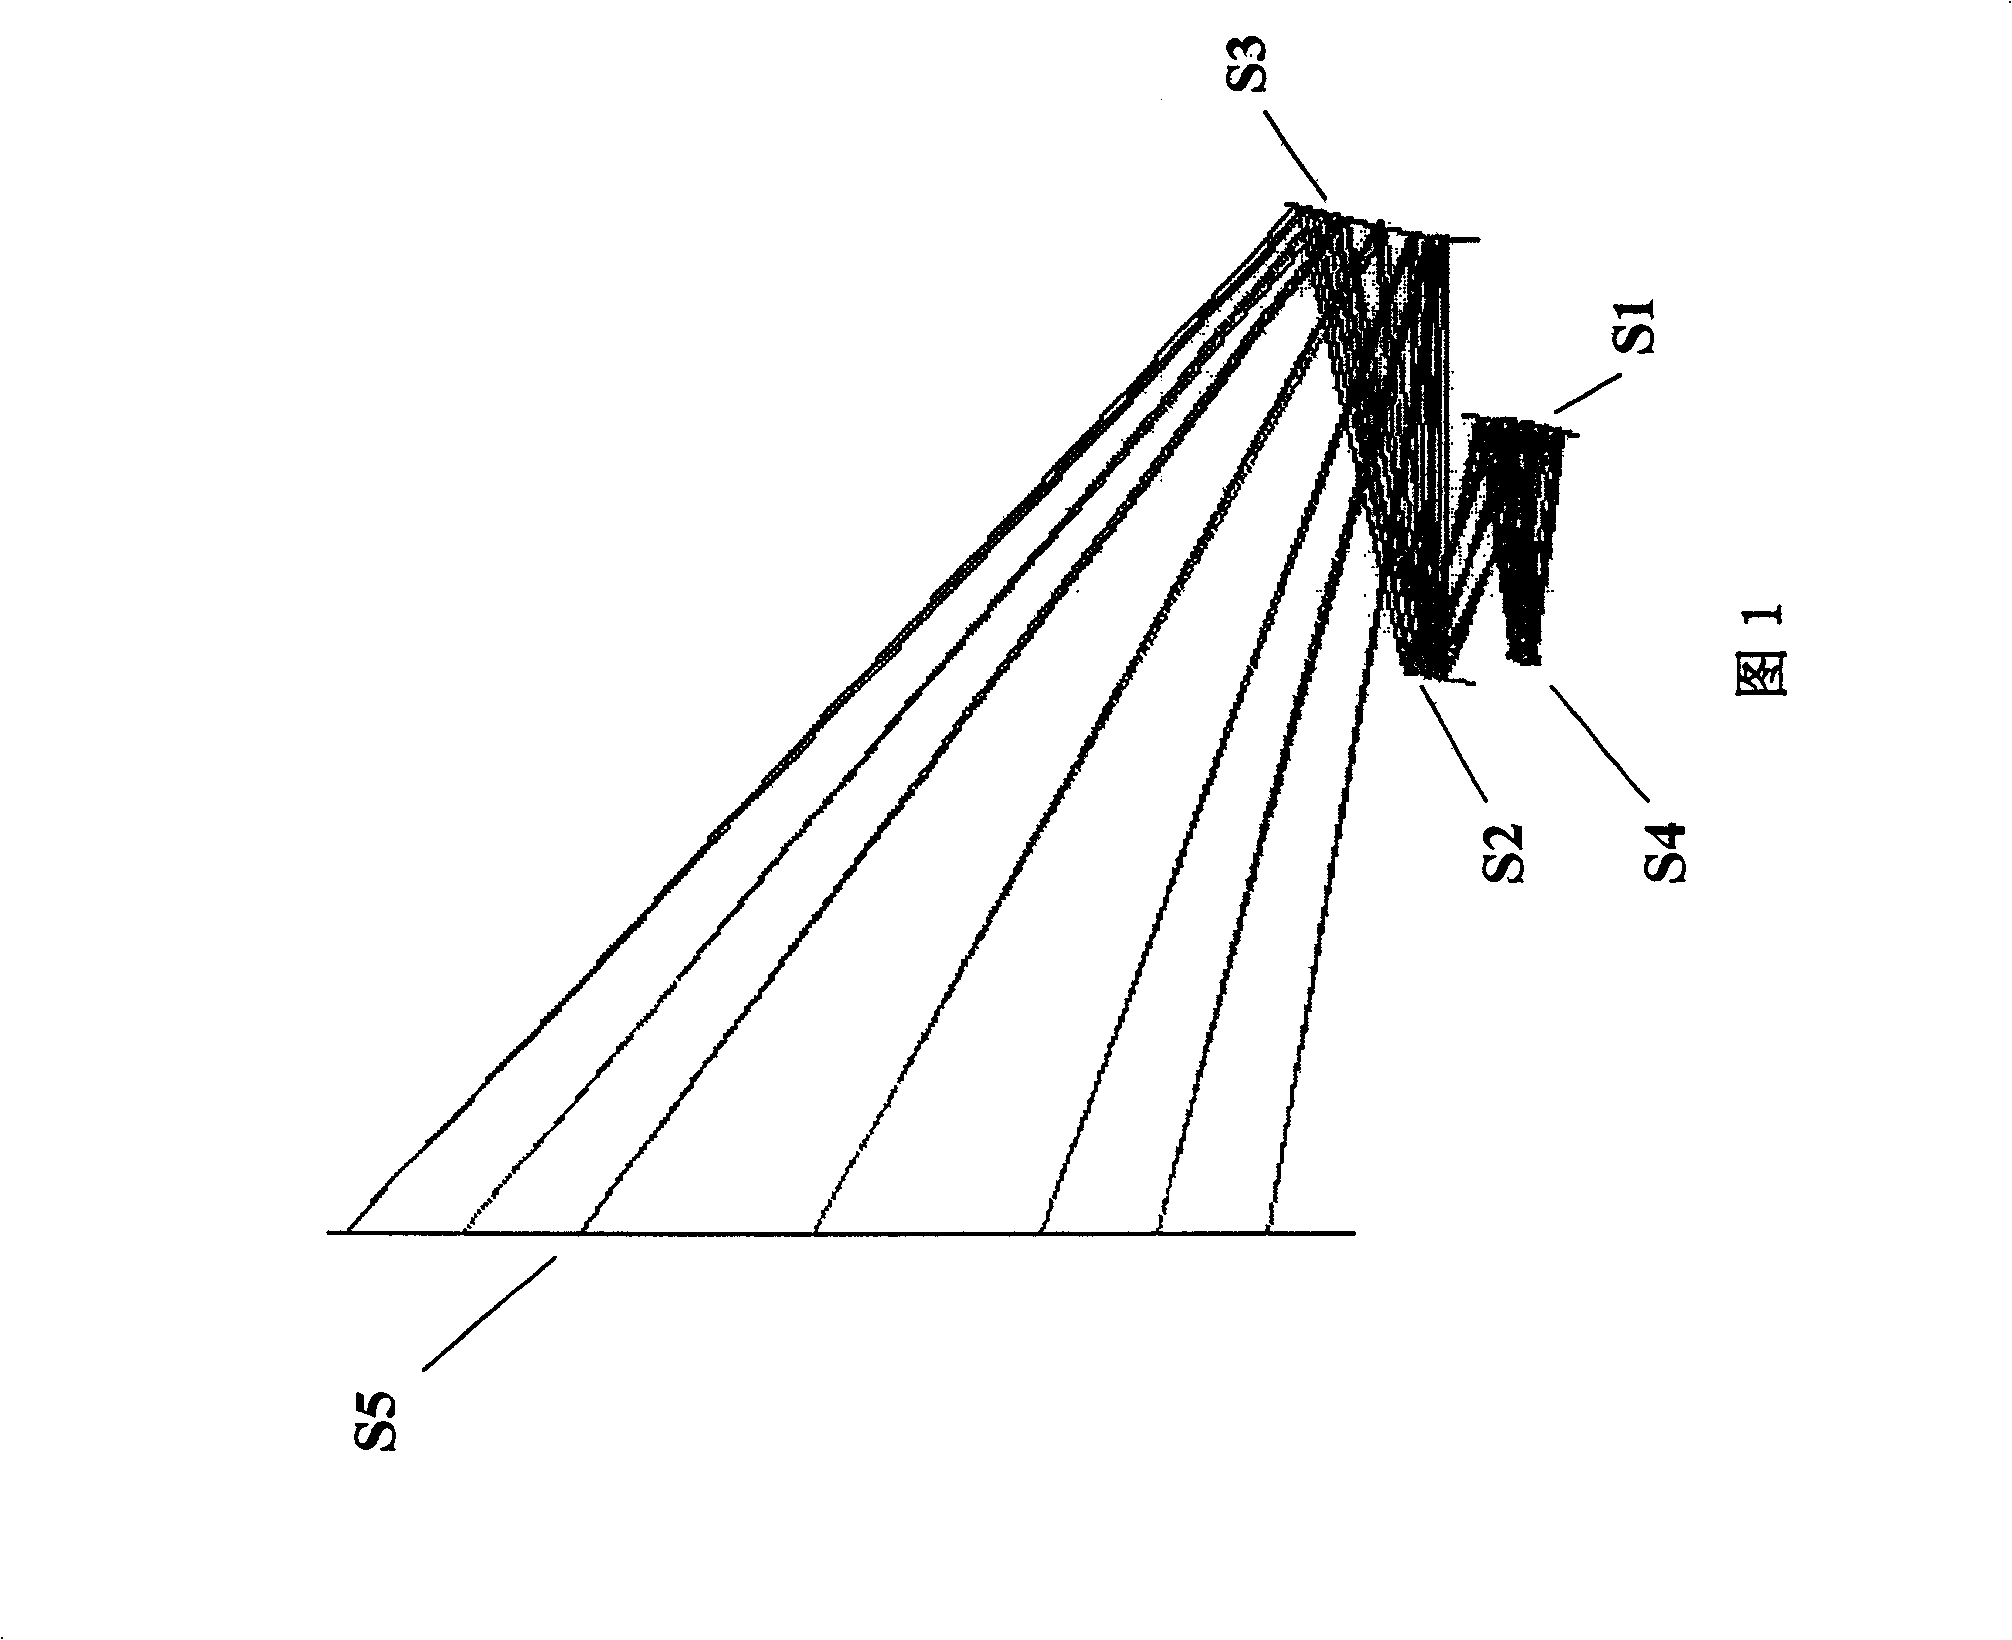 Super thin reflective projection display imaging method and objective lens based on free camber